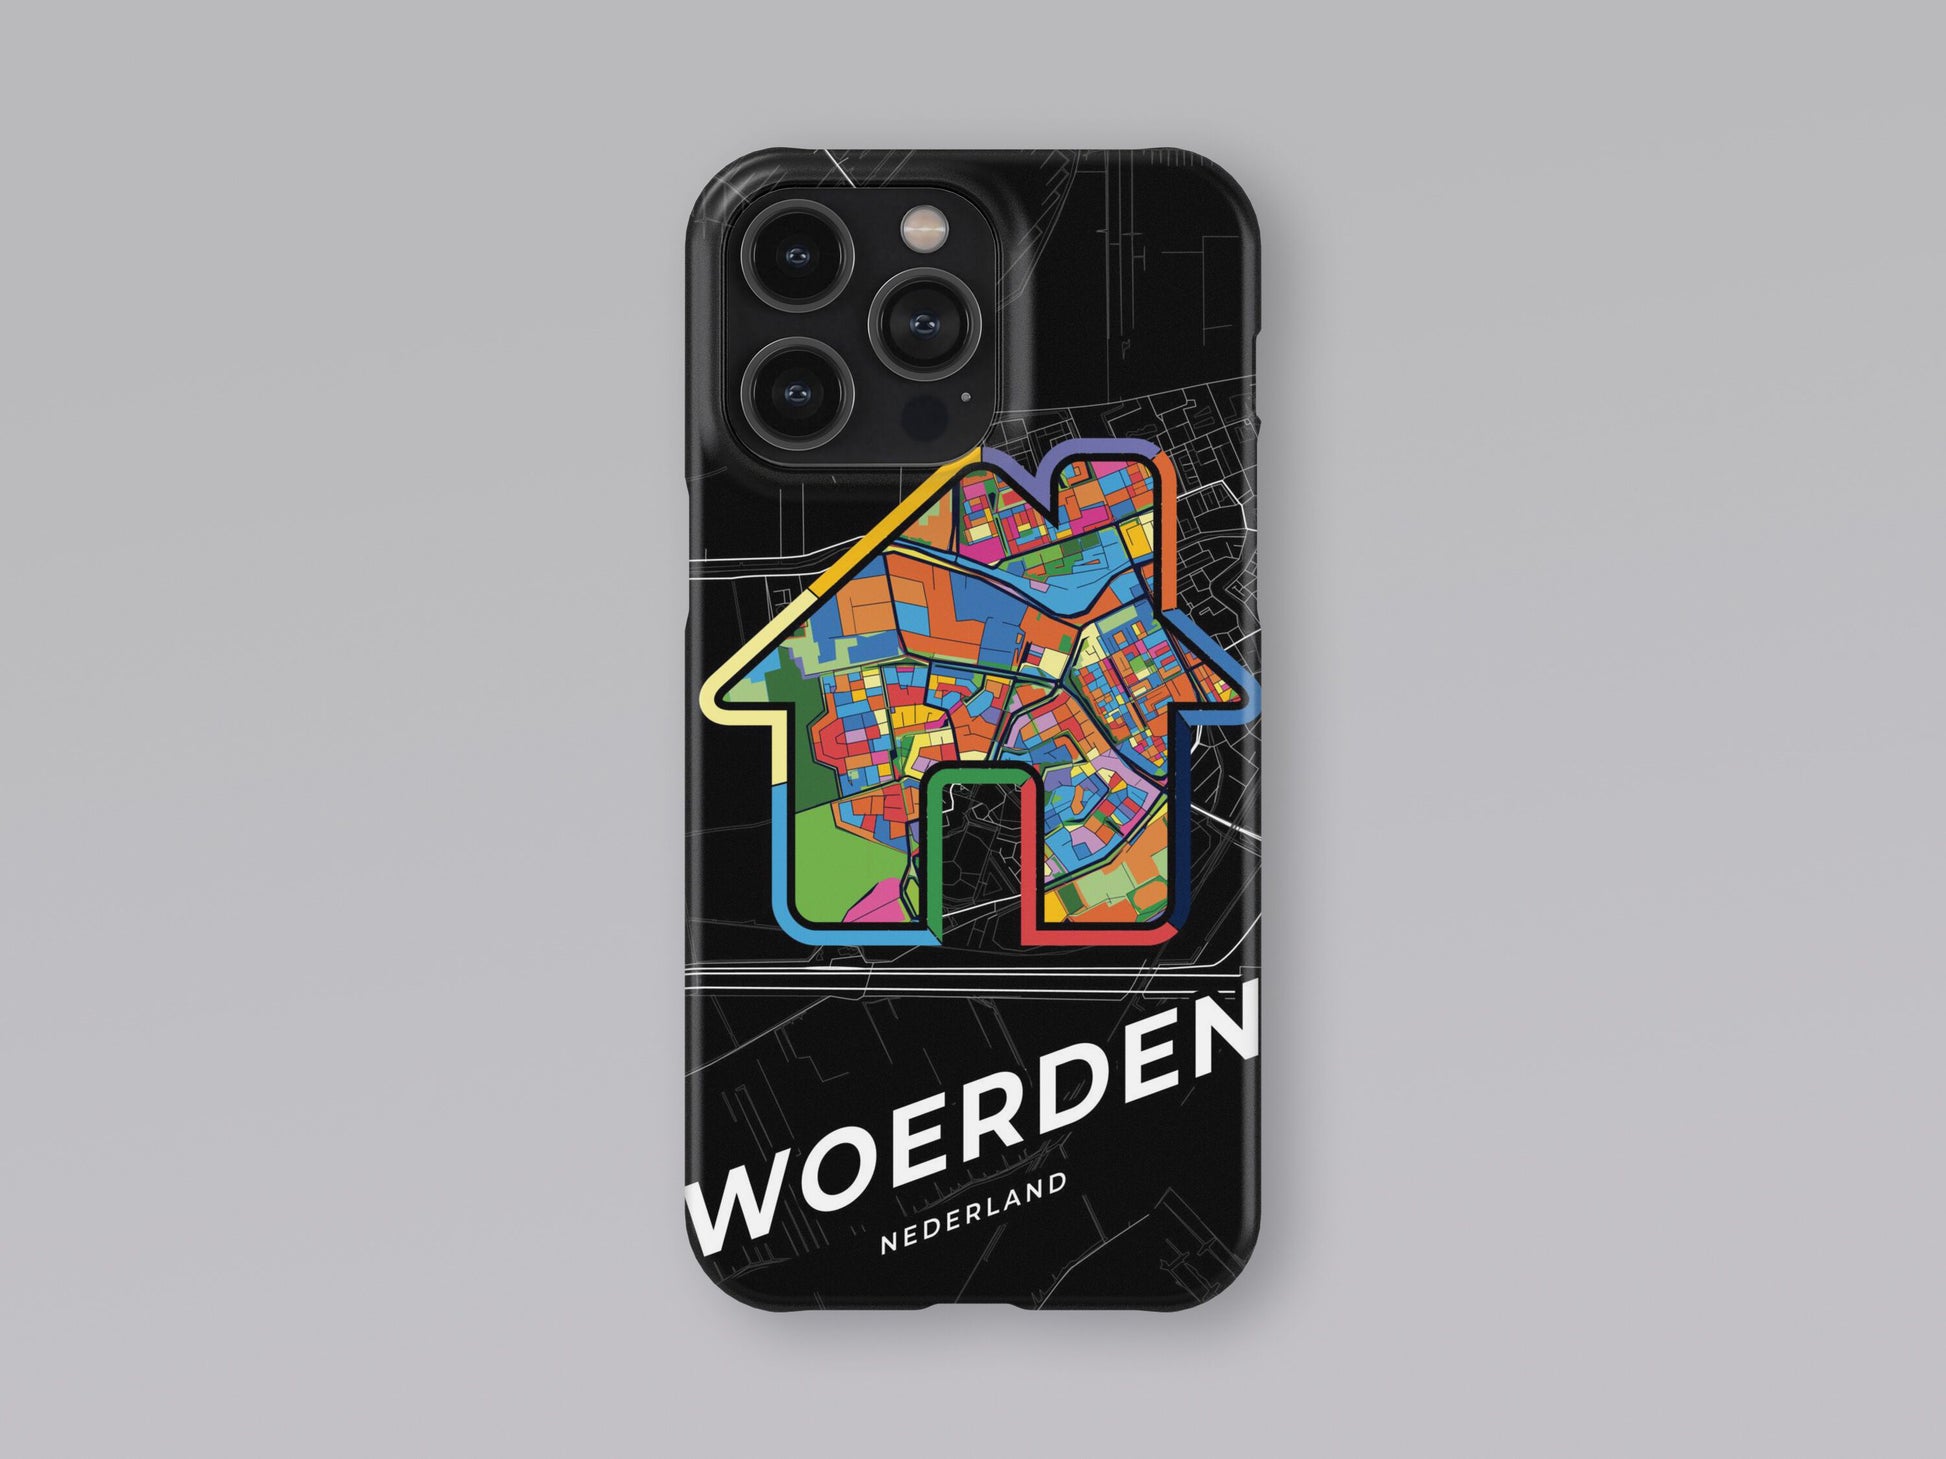 Woerden Netherlands slim phone case with colorful icon 3